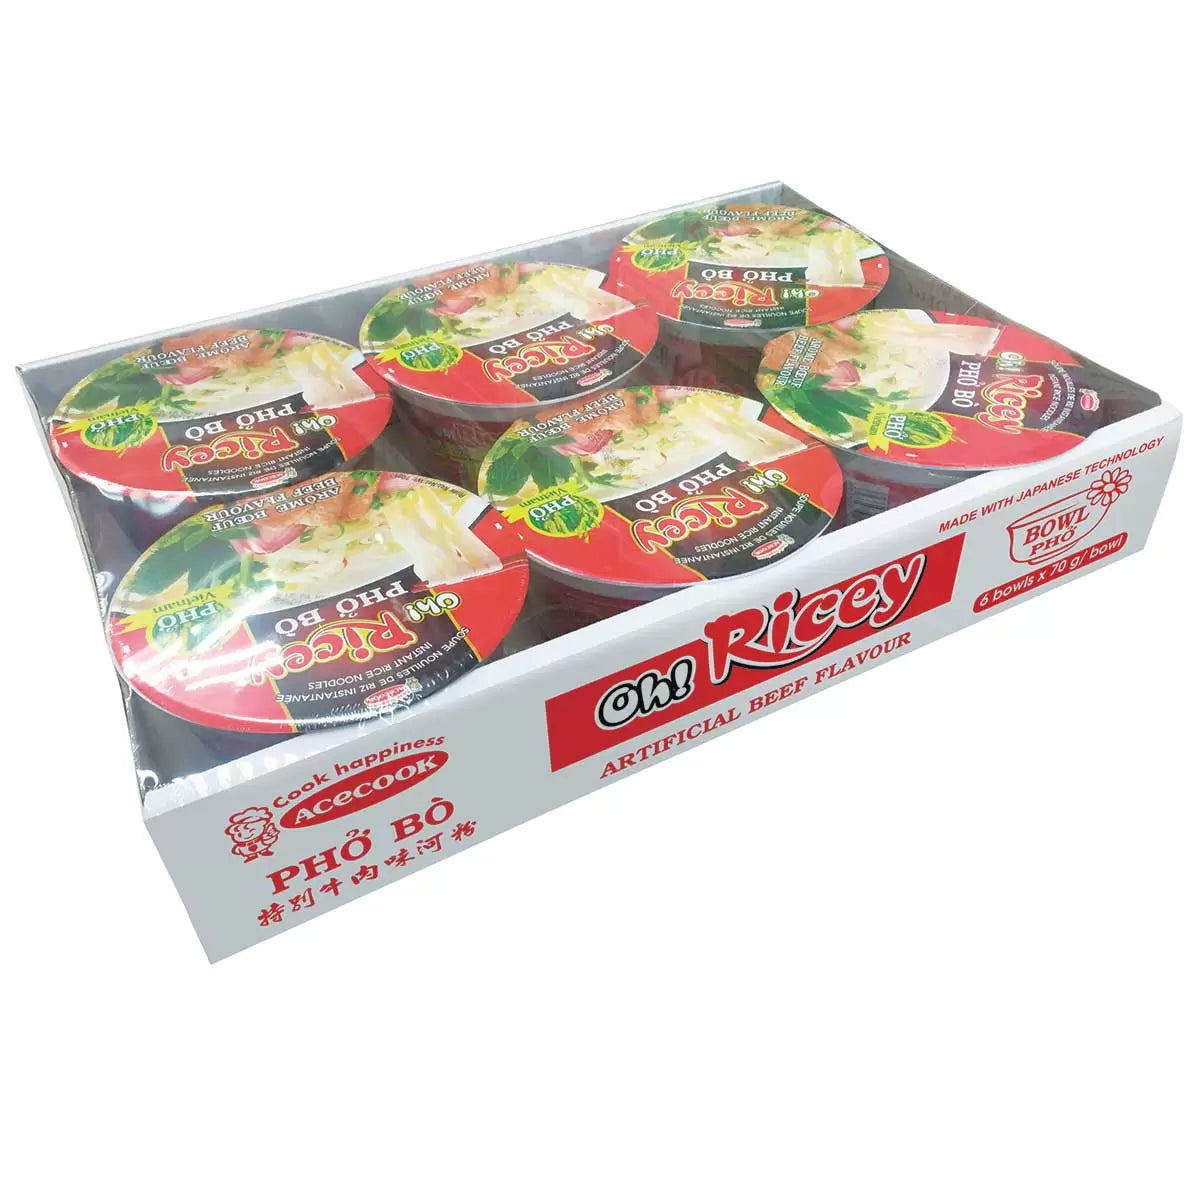 Oh! Ricey Pho Noodles Beef Flavour - 71g (pack of 6)